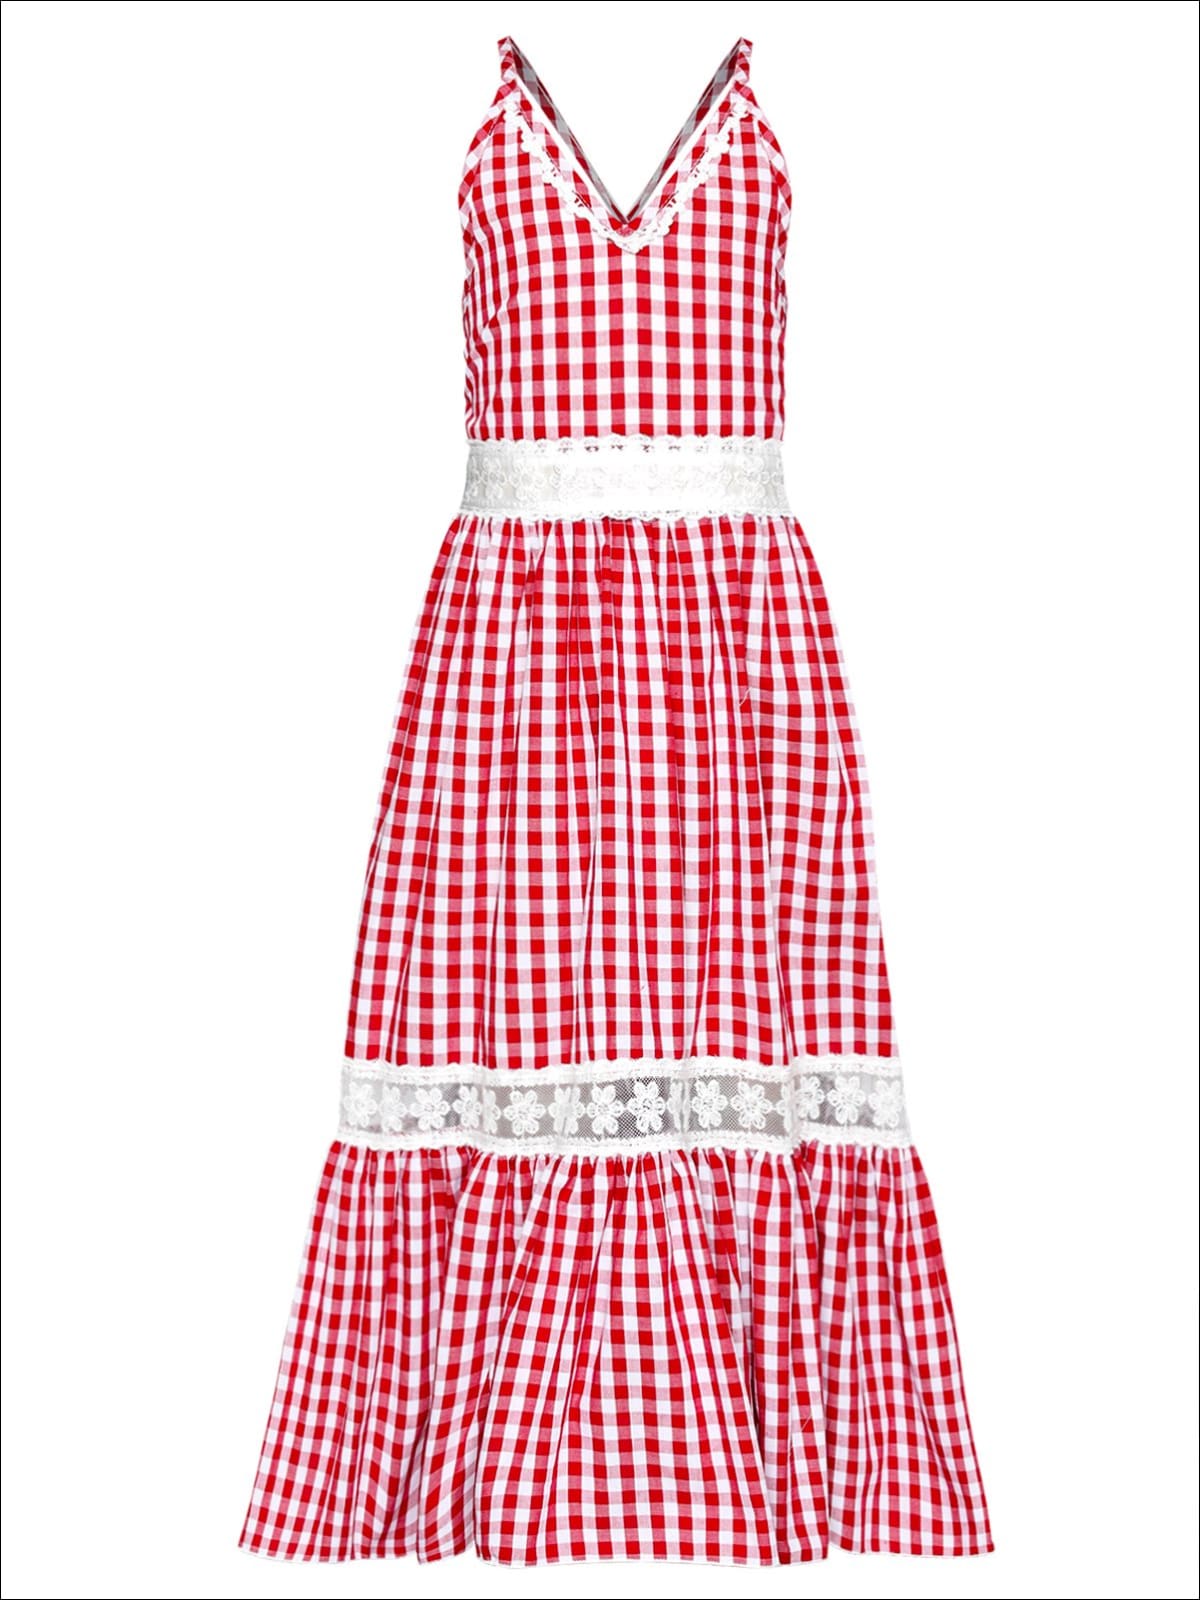 Girls Gingham Ruffled Lace Insert Maxi Dress - Red / 2T/3T - Girls Spring Casual Dress